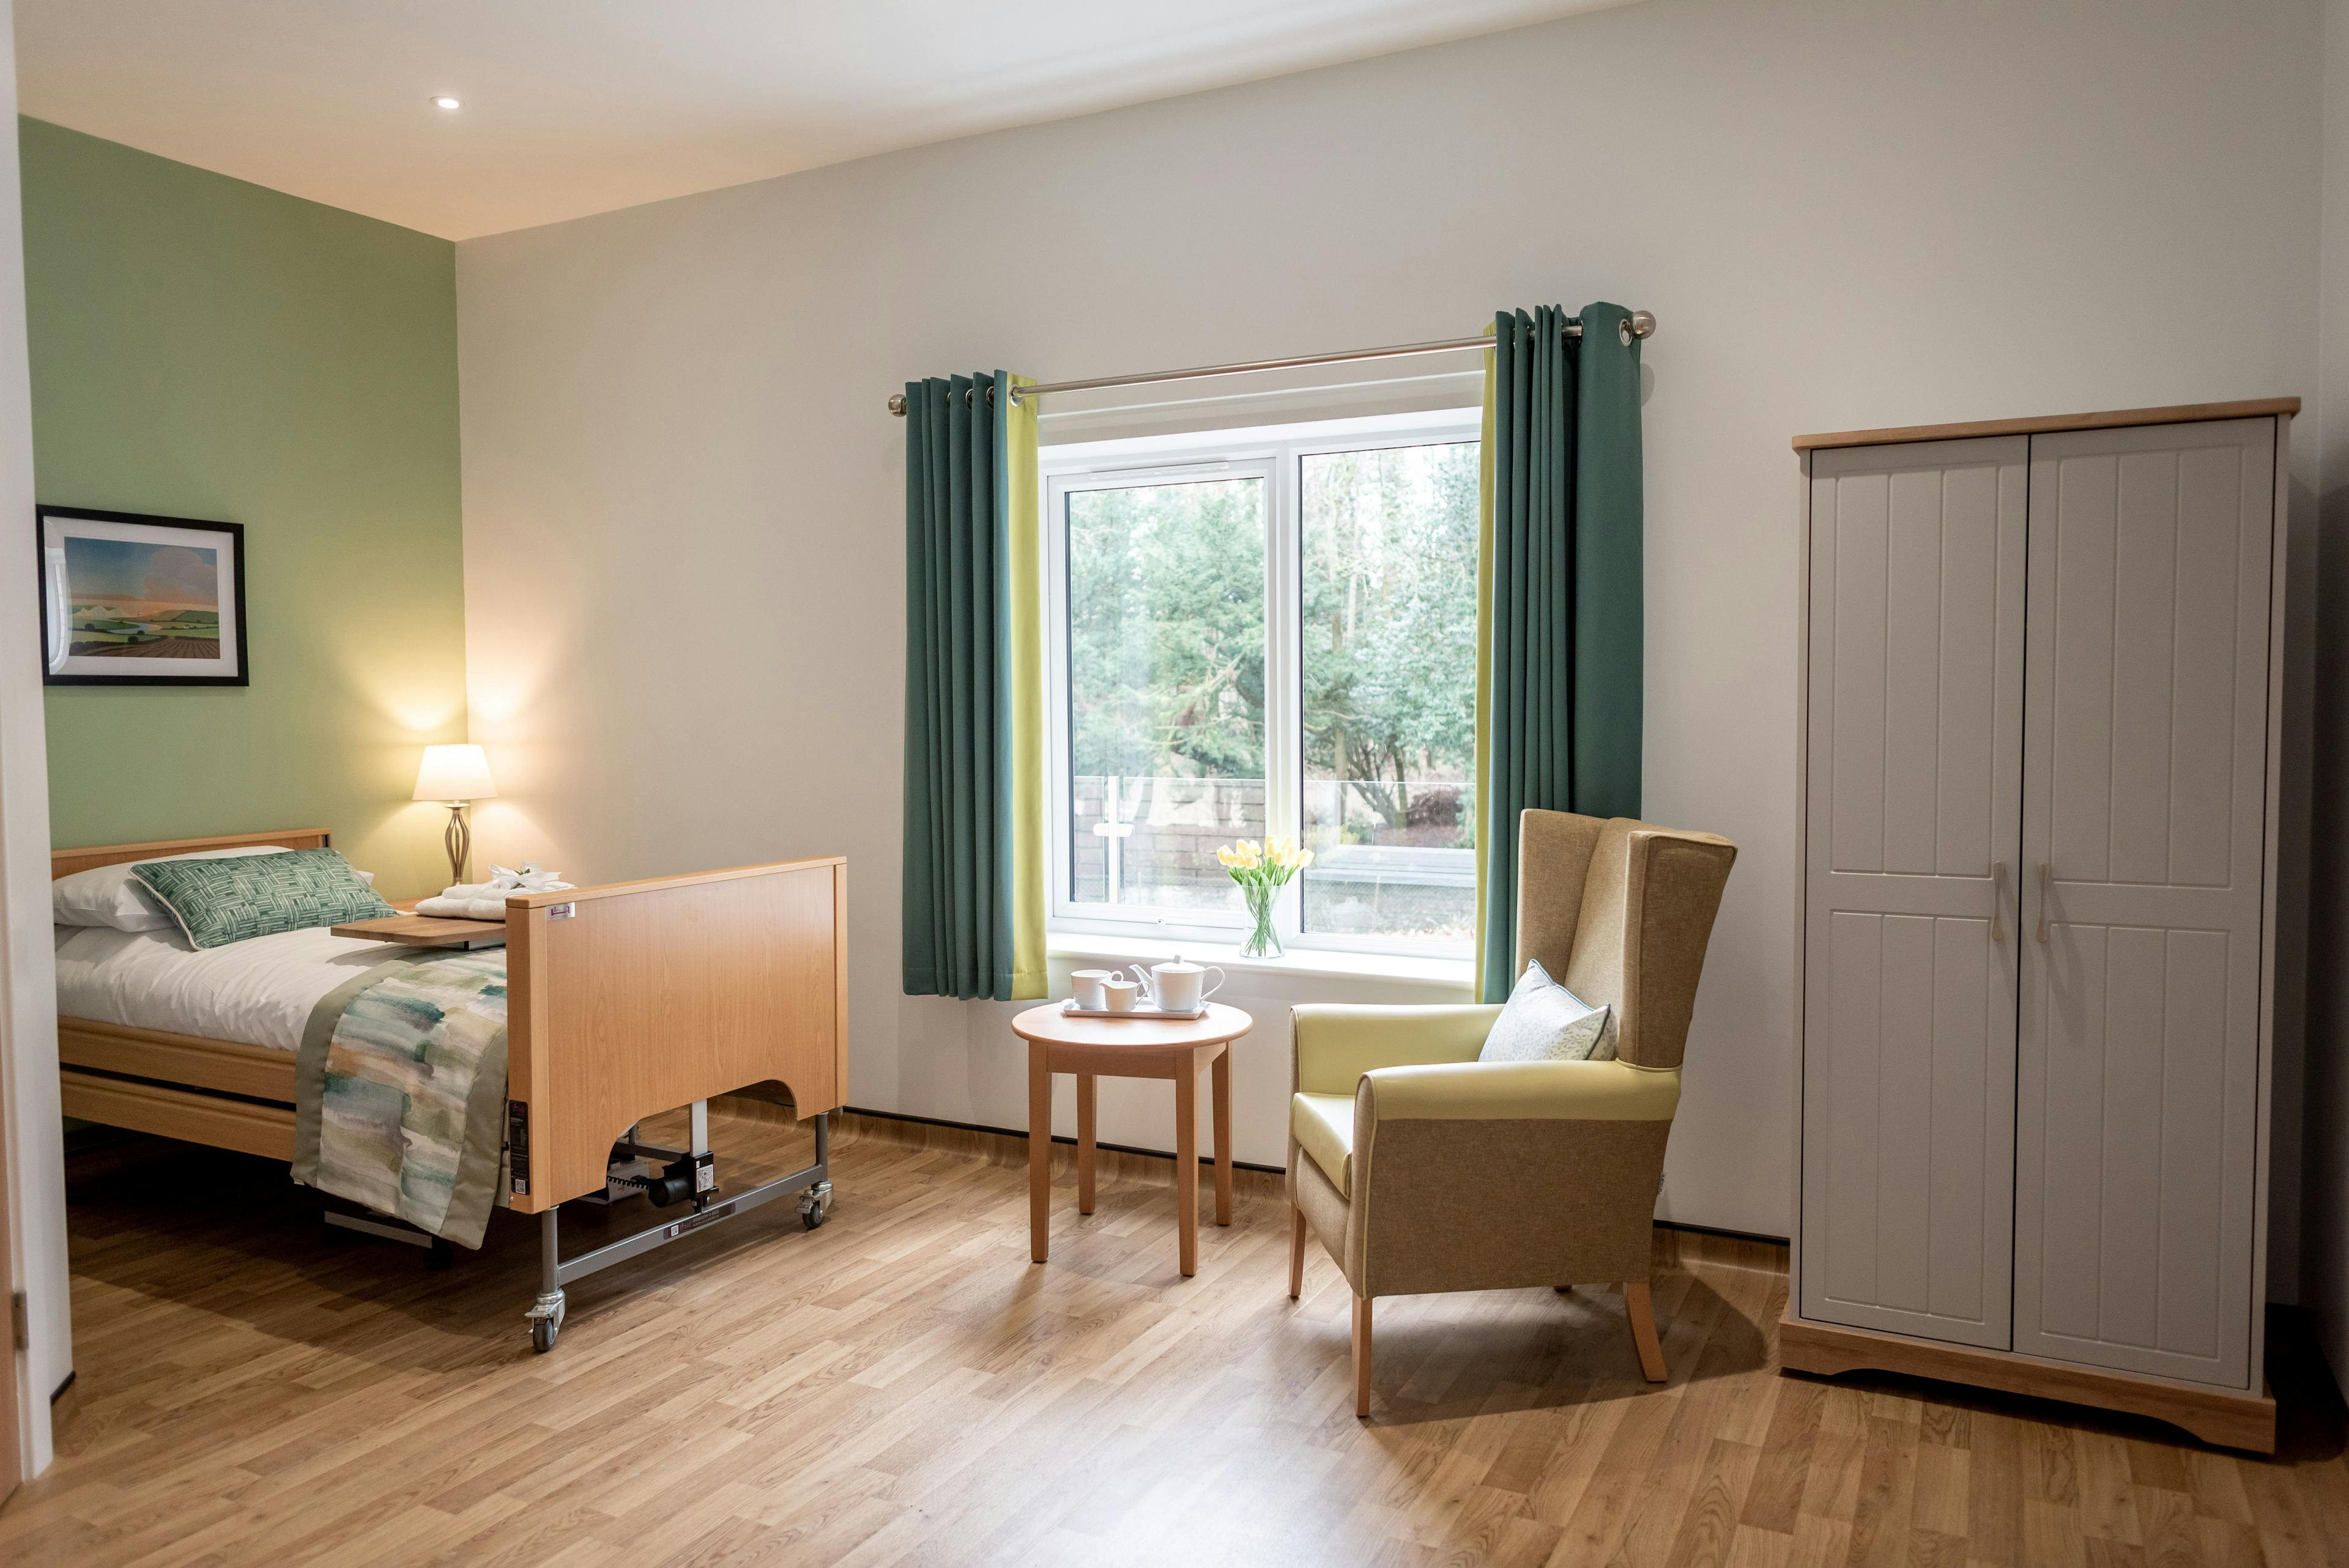 Bedroom of Ford Place care home in Thetford, Norfolk